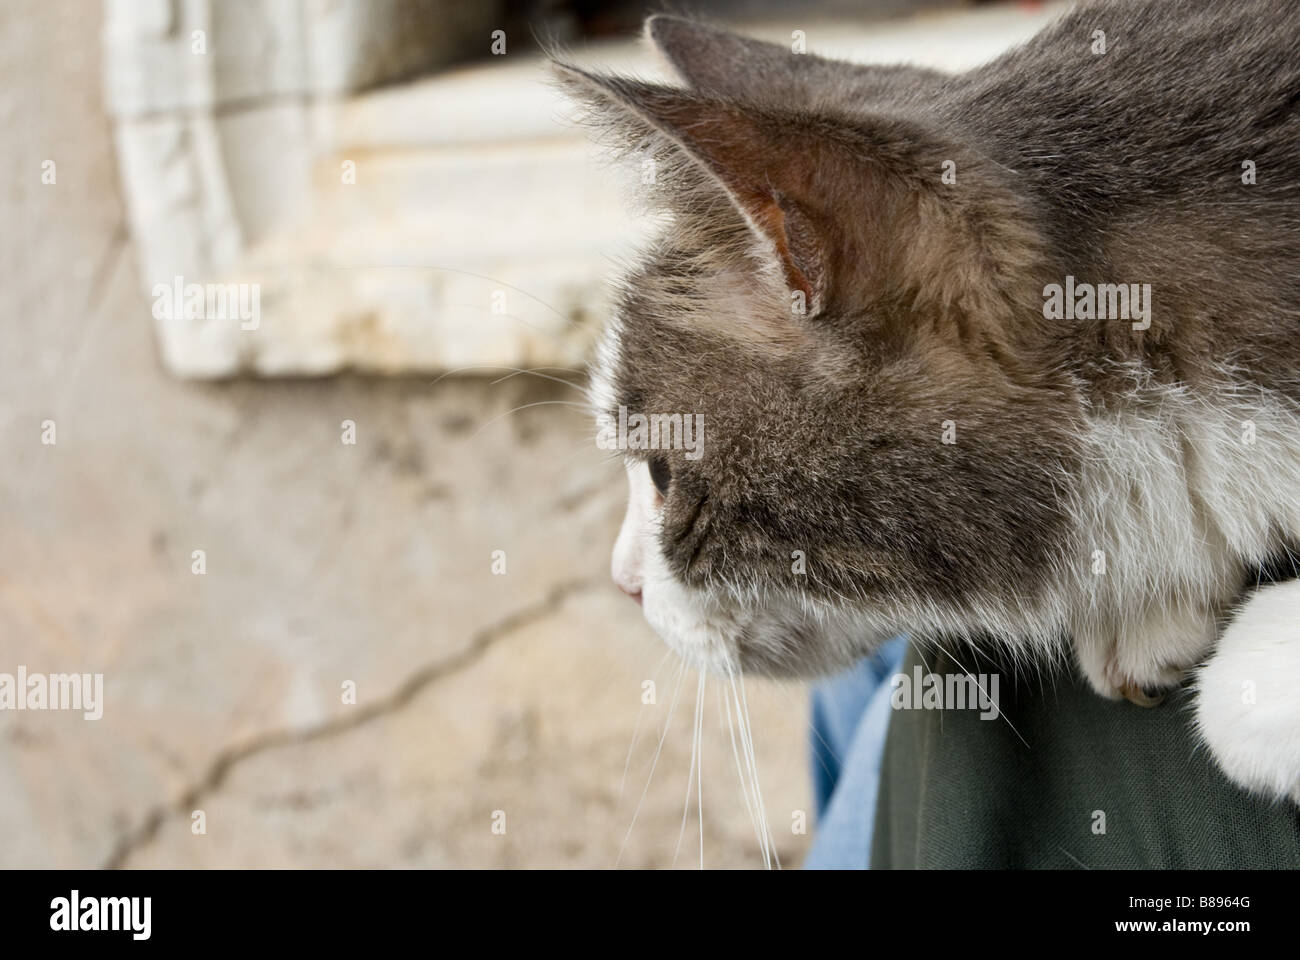 Close outdoor view of a cat Stock Photo